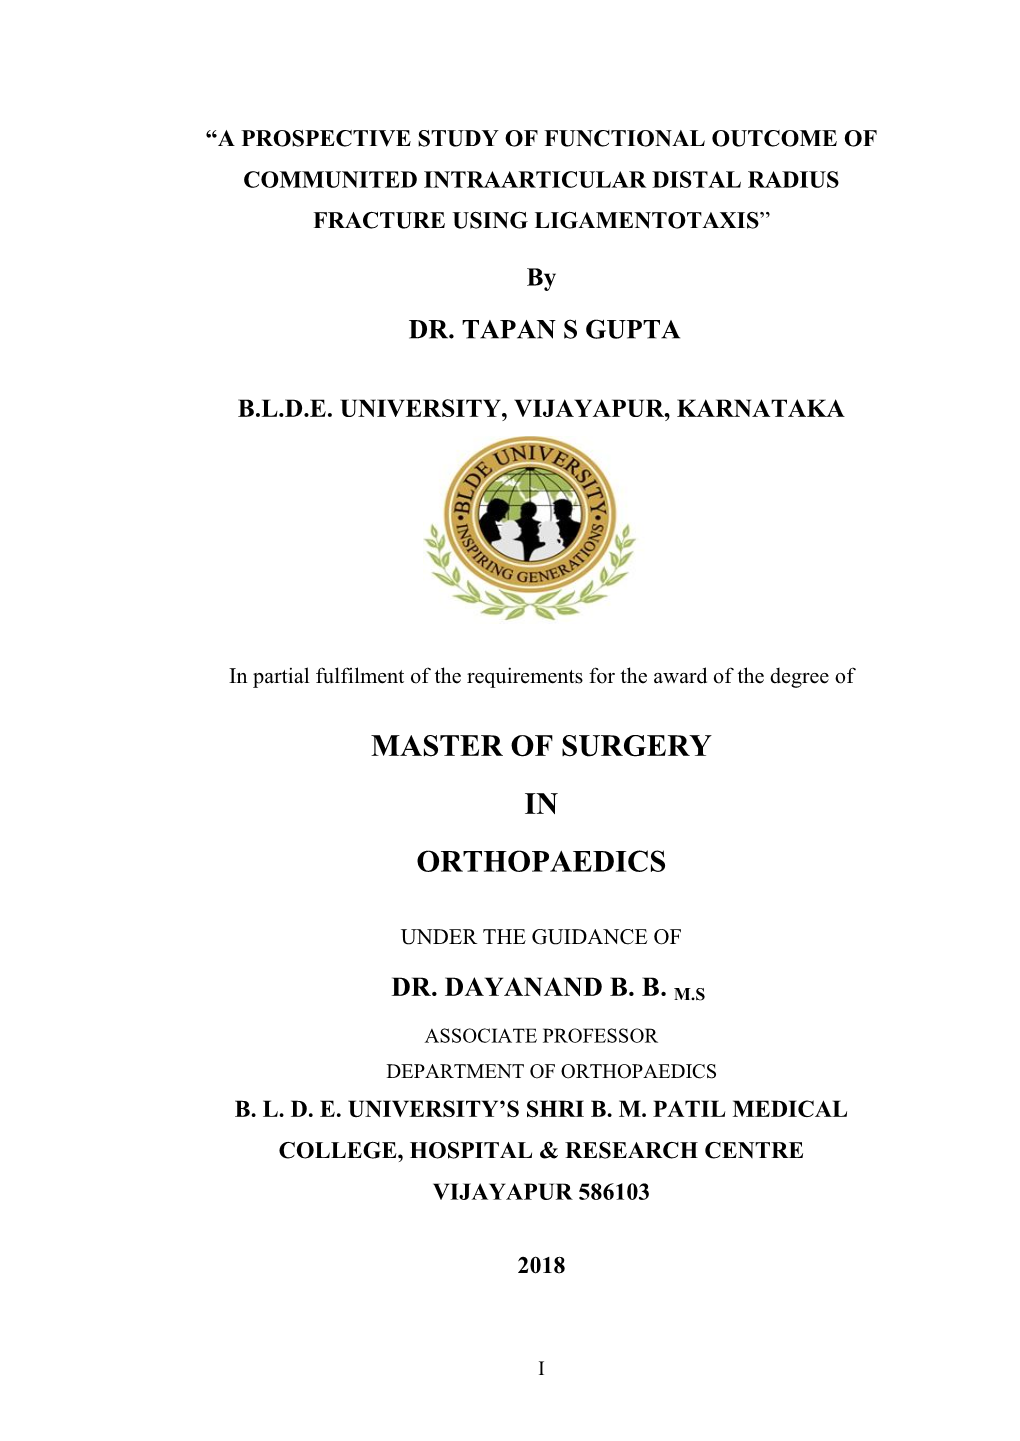 Master of Surgery in Orthopaedics